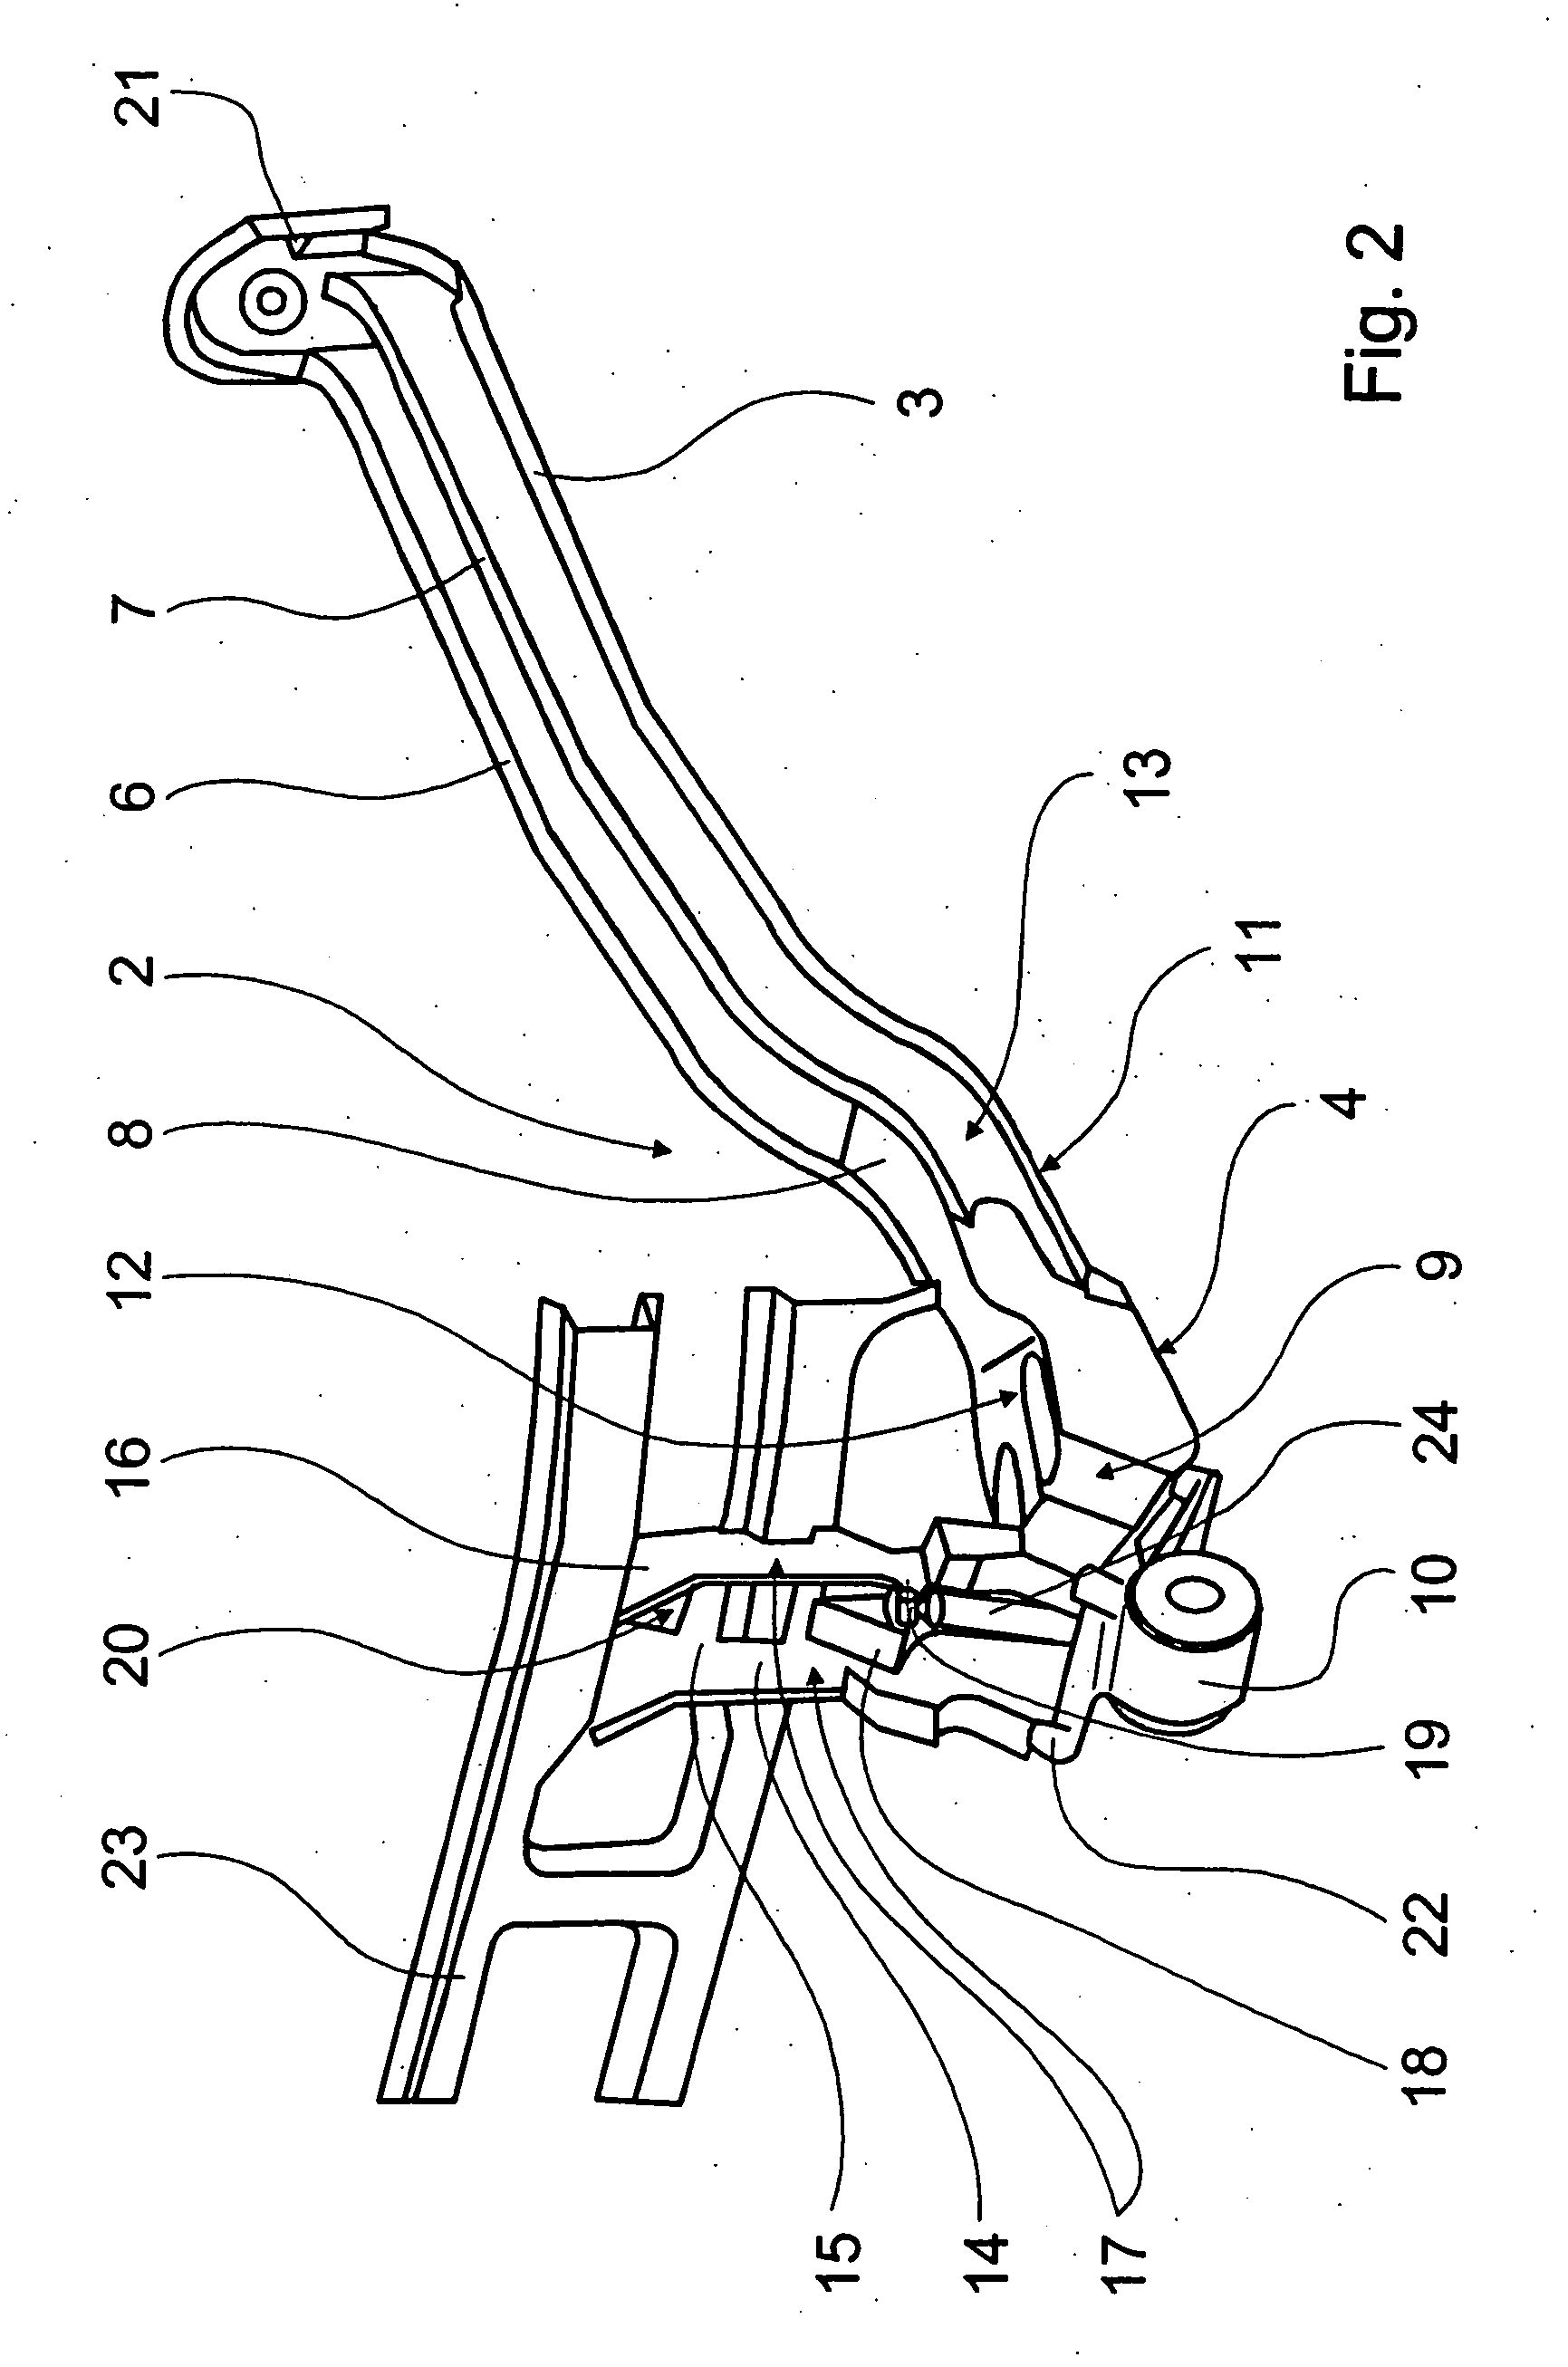 Longitudinal Beam for a Driver's Cab and Carrier Structure Comprising One Such Longitudinal Beam